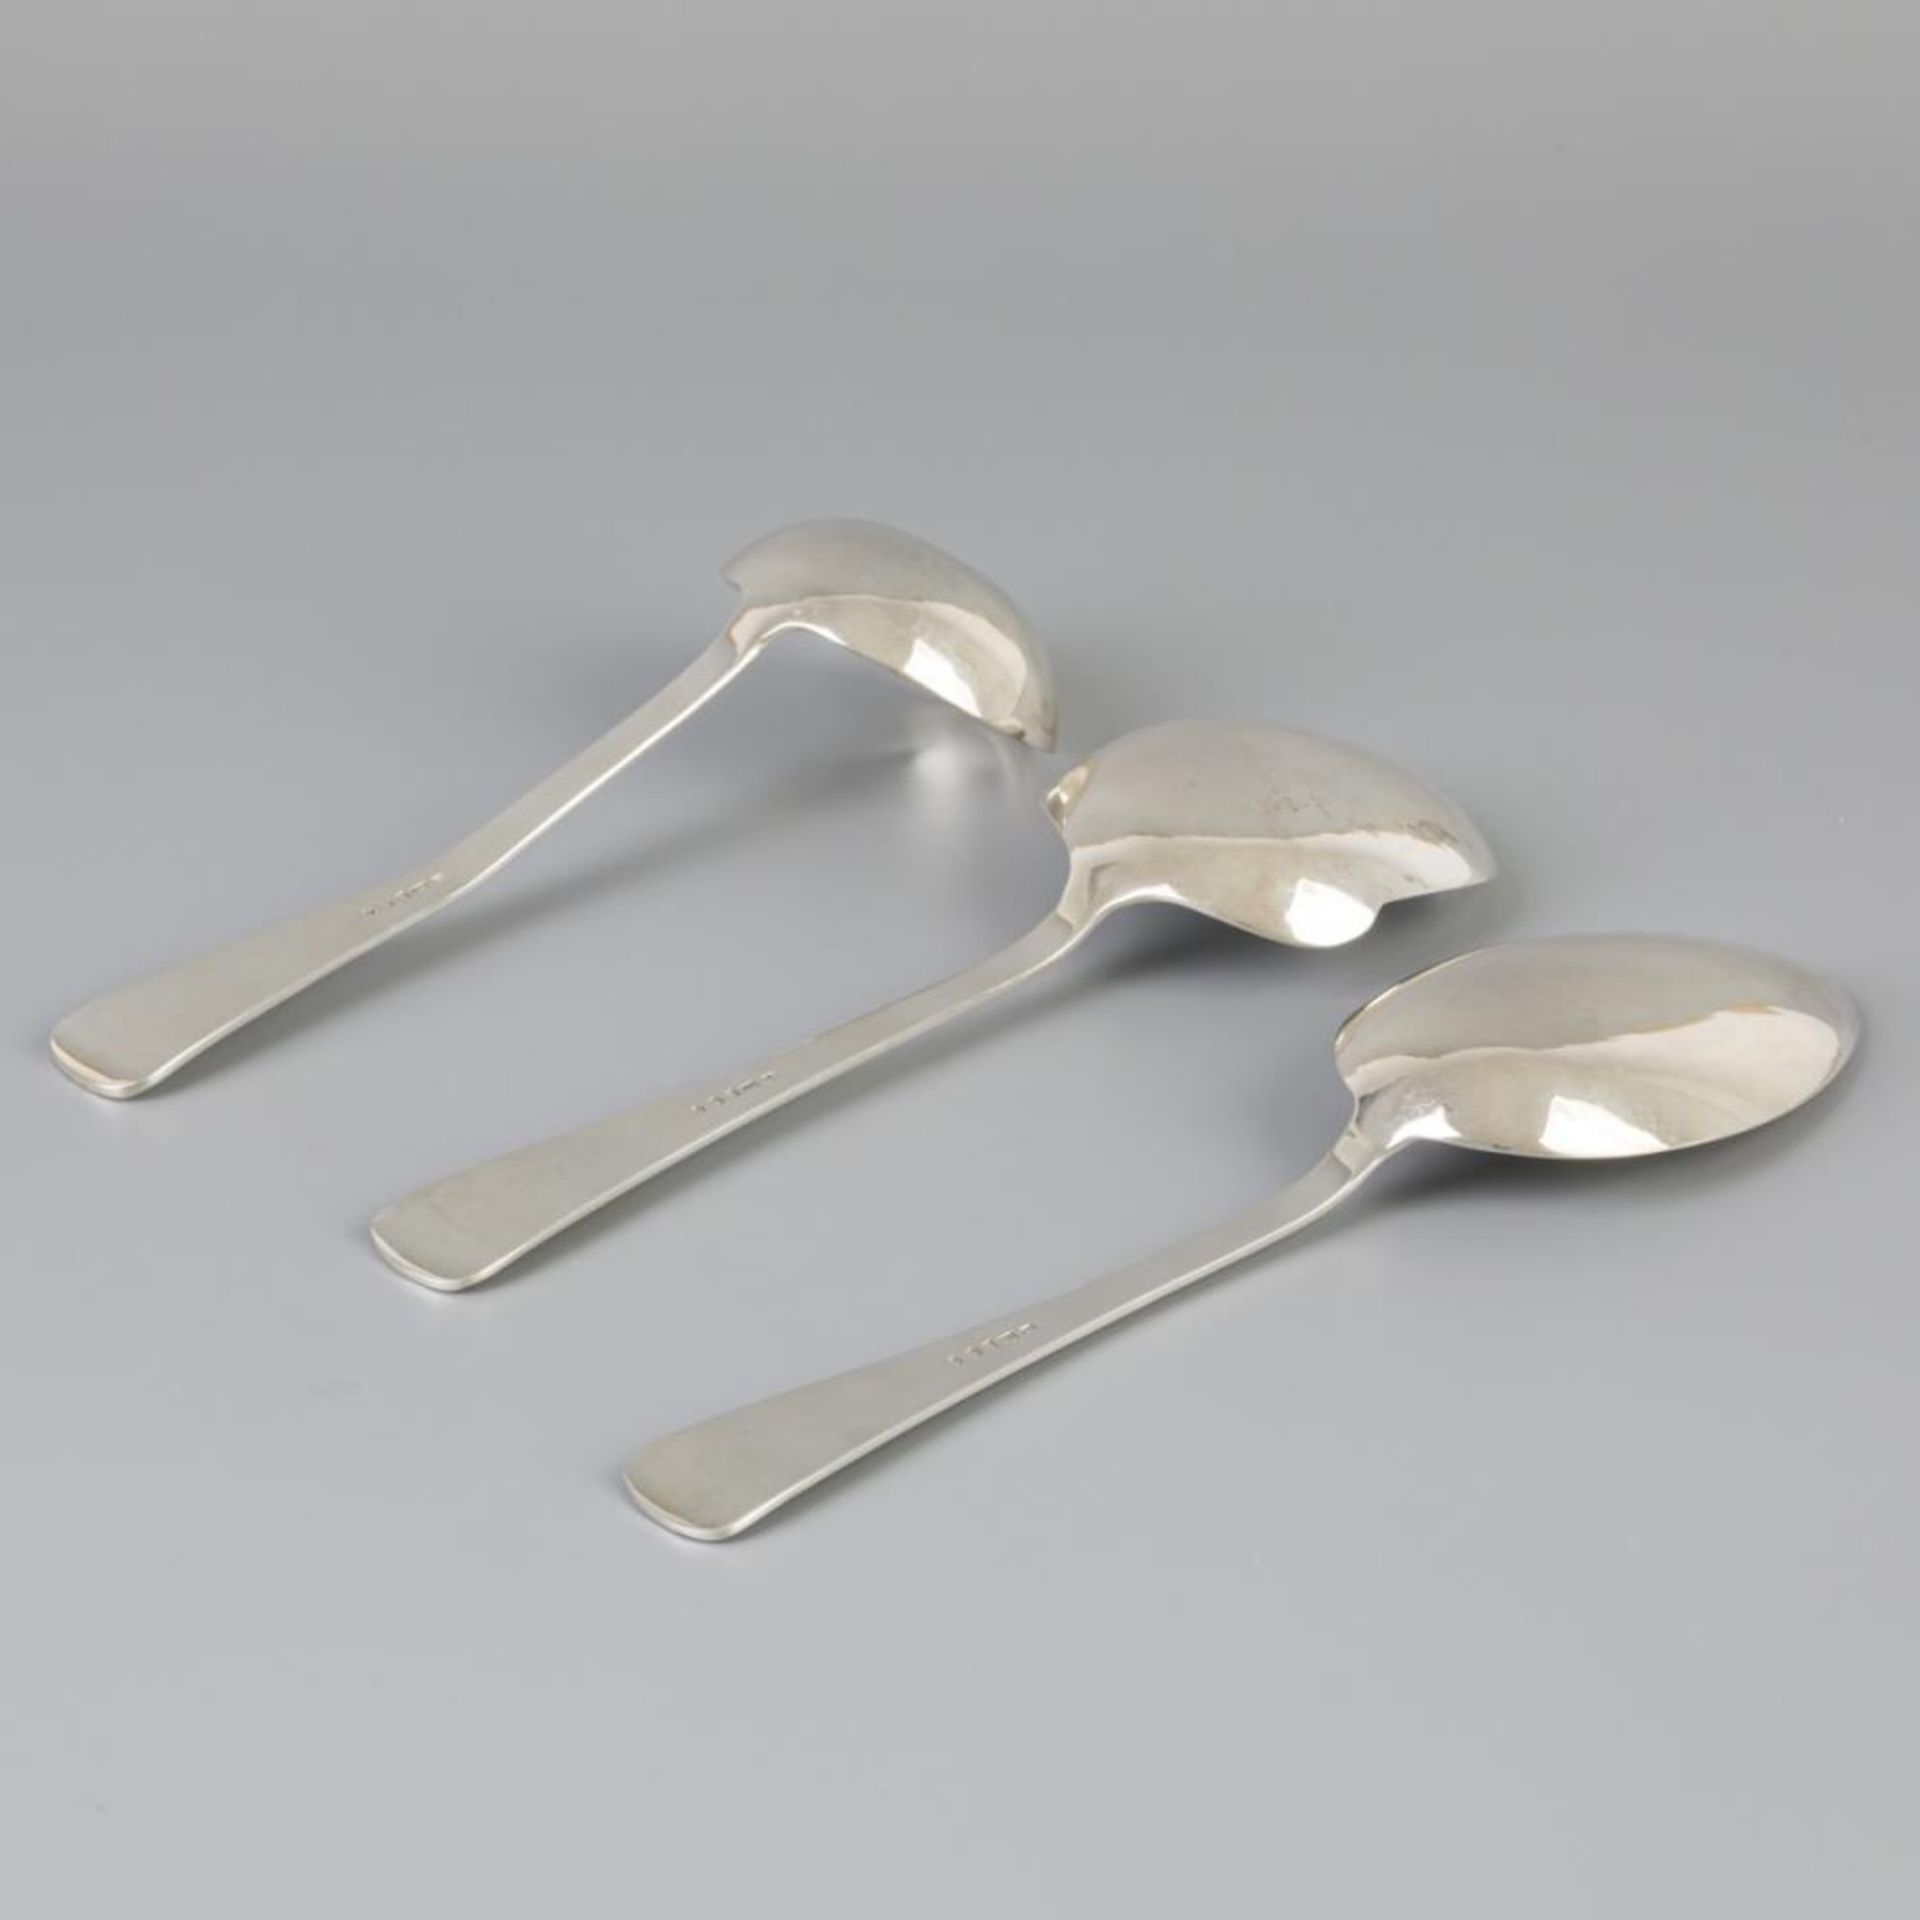 3 piece set of spoons / laddles "Haags Lofje" silver. - Image 3 of 5